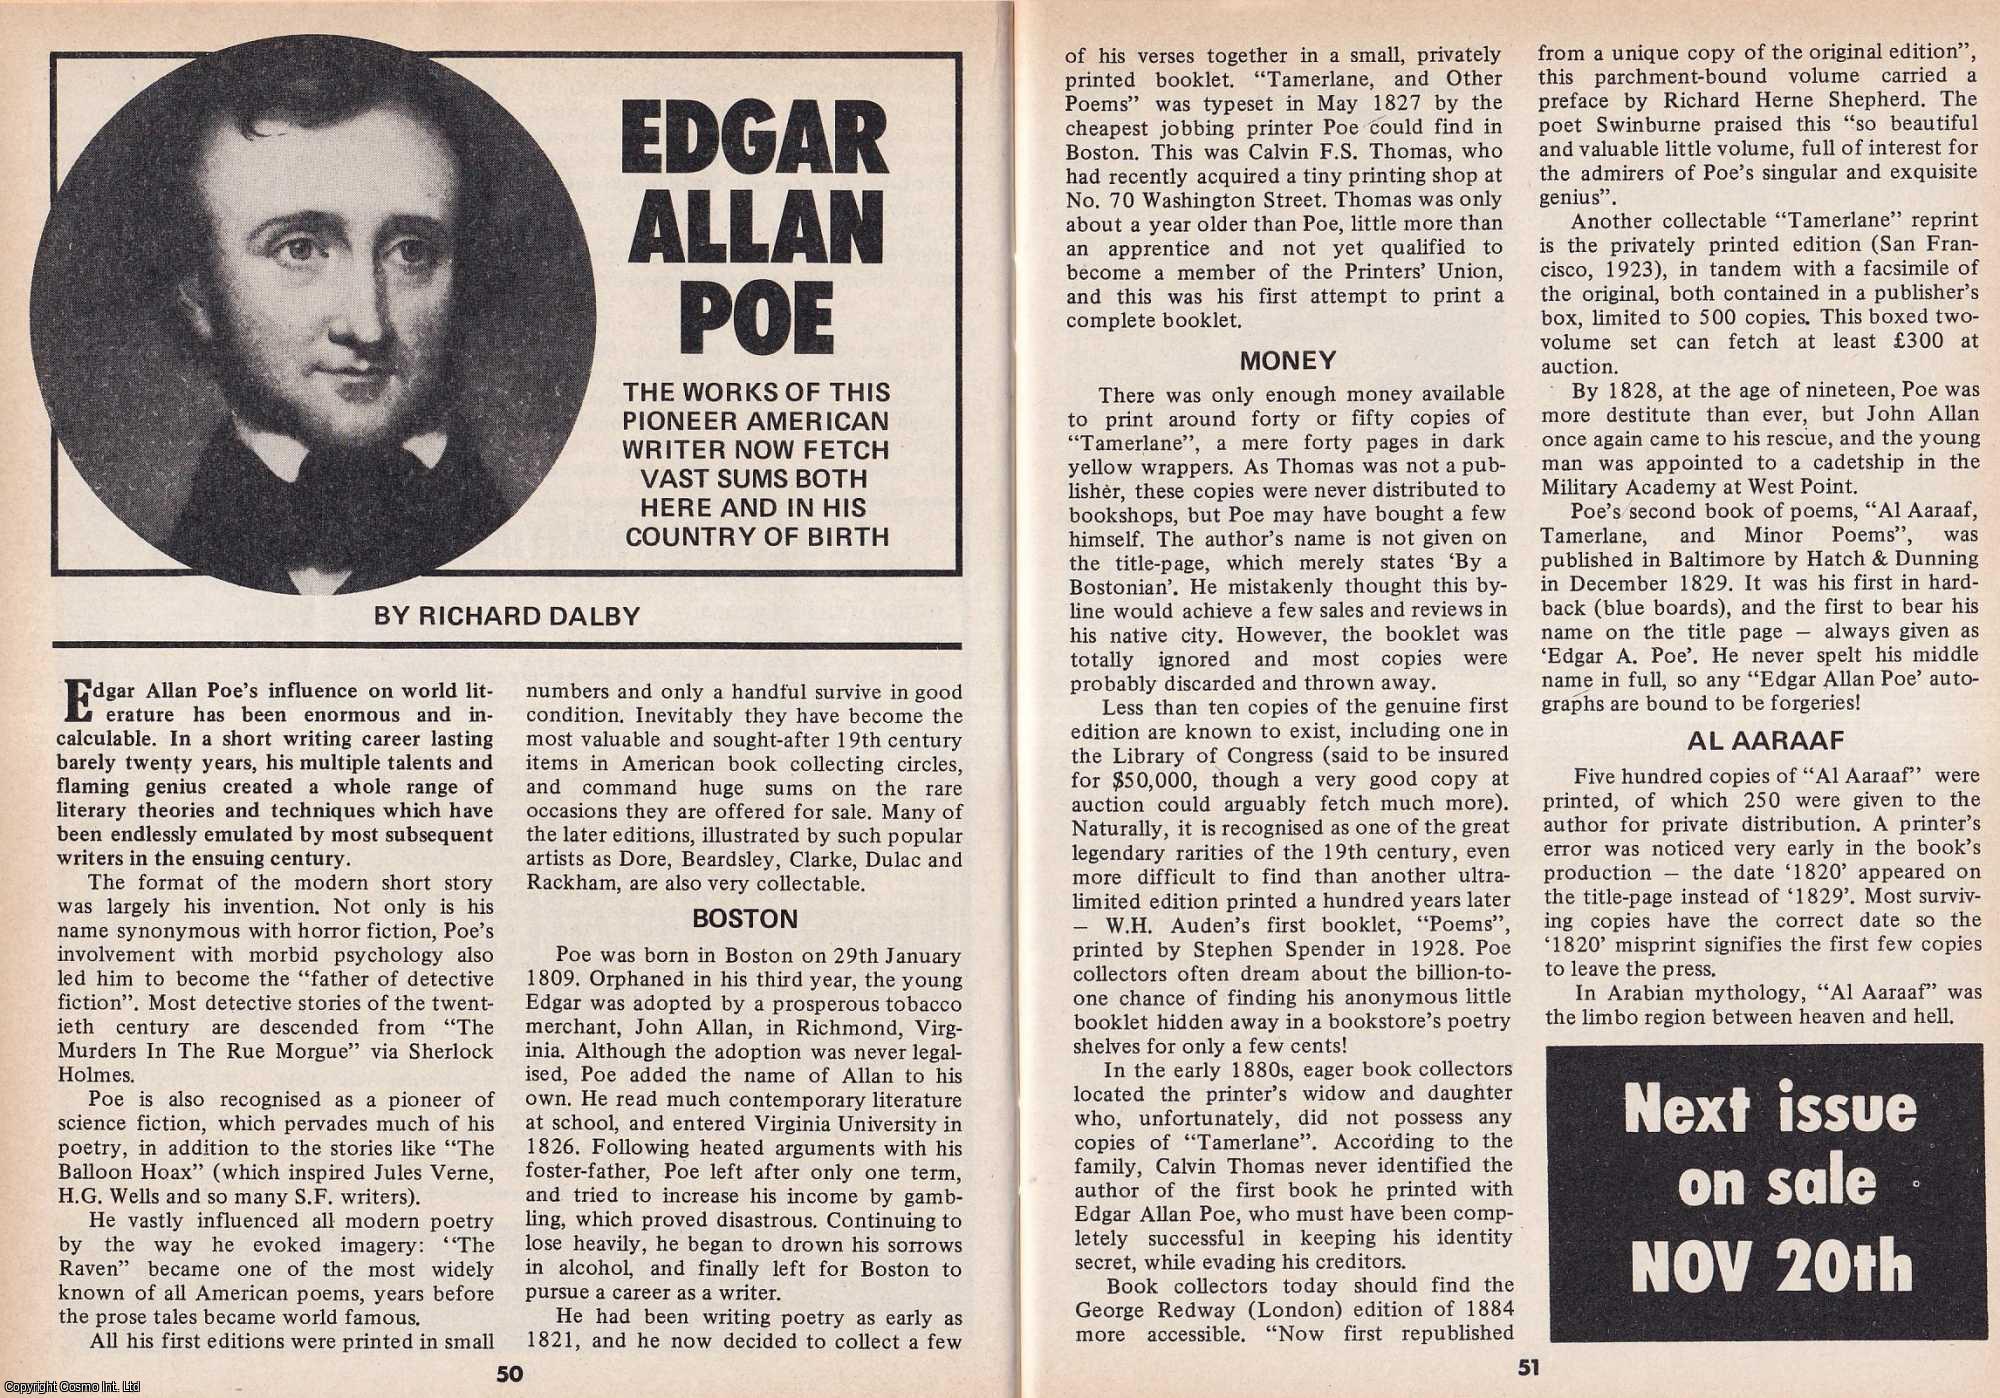 Richard Dalby - Edgar Allan Poe. The Works of this Pioneer American Writer. This is an original article separated from an issue of The Book & Magazine Collector publication.